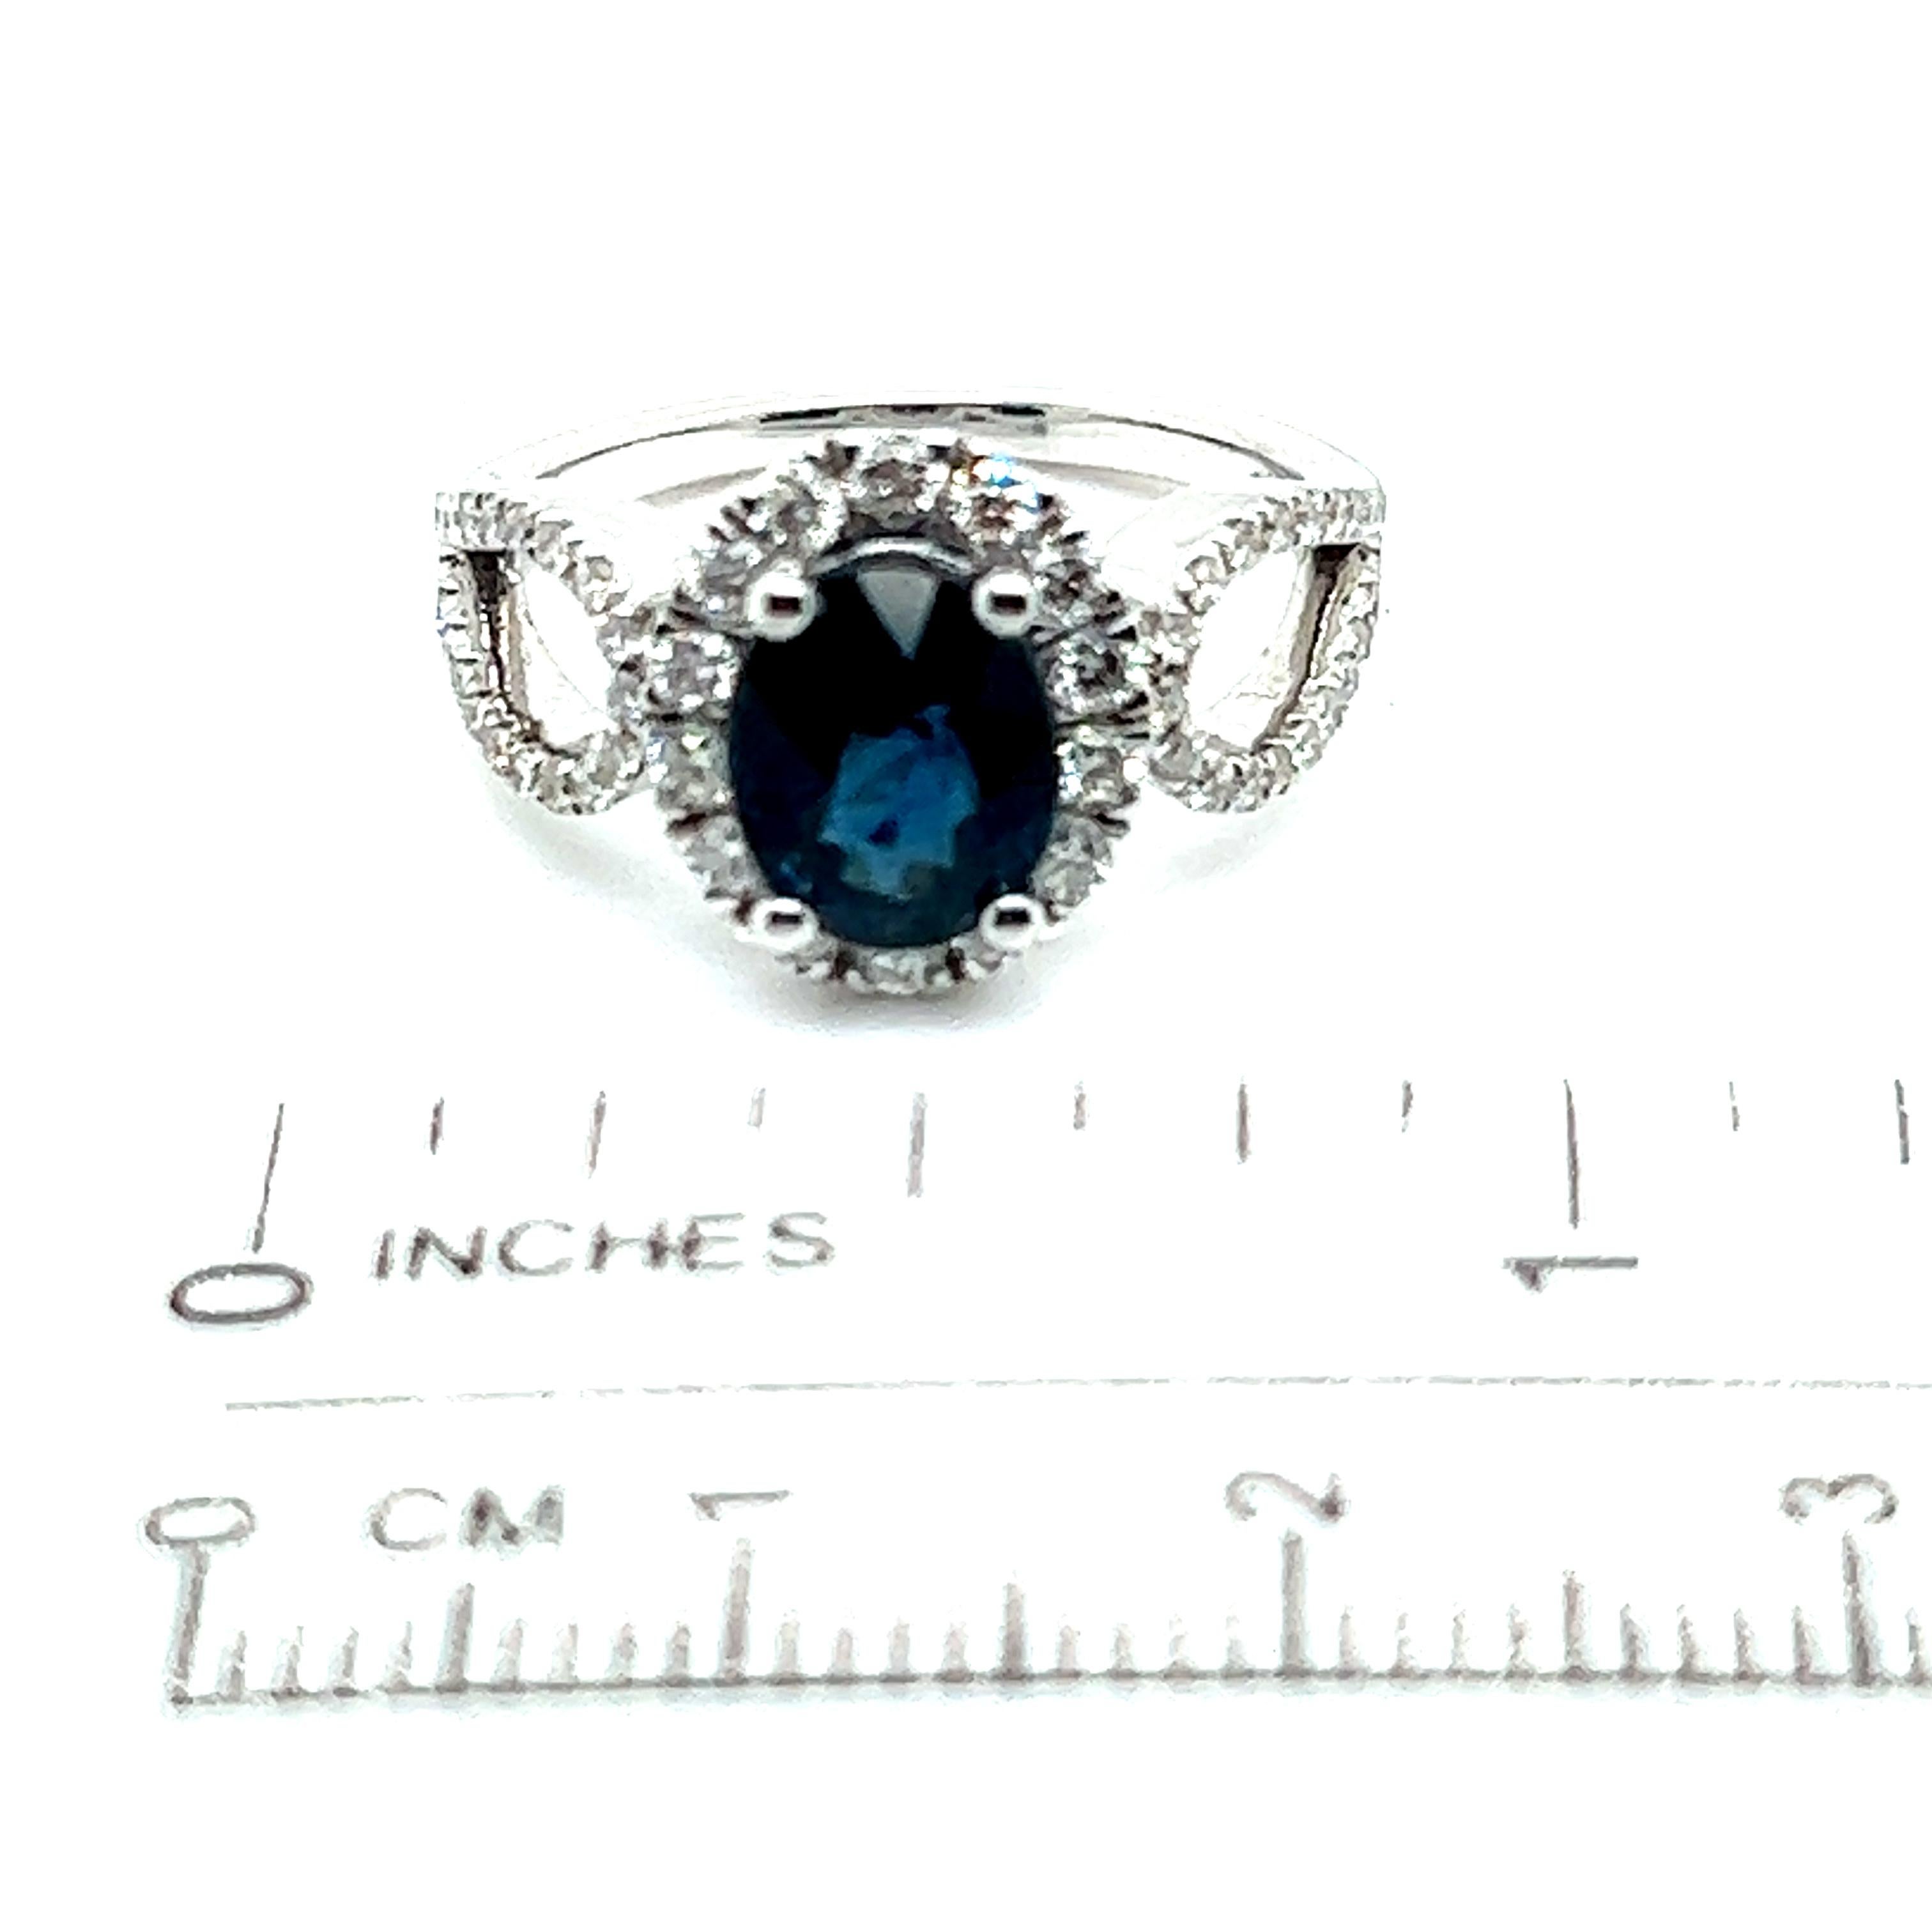 Mixed Cut Natural Sapphire Diamond Ring Size 6.25 14k W Gold 2.93 TCW Certified For Sale